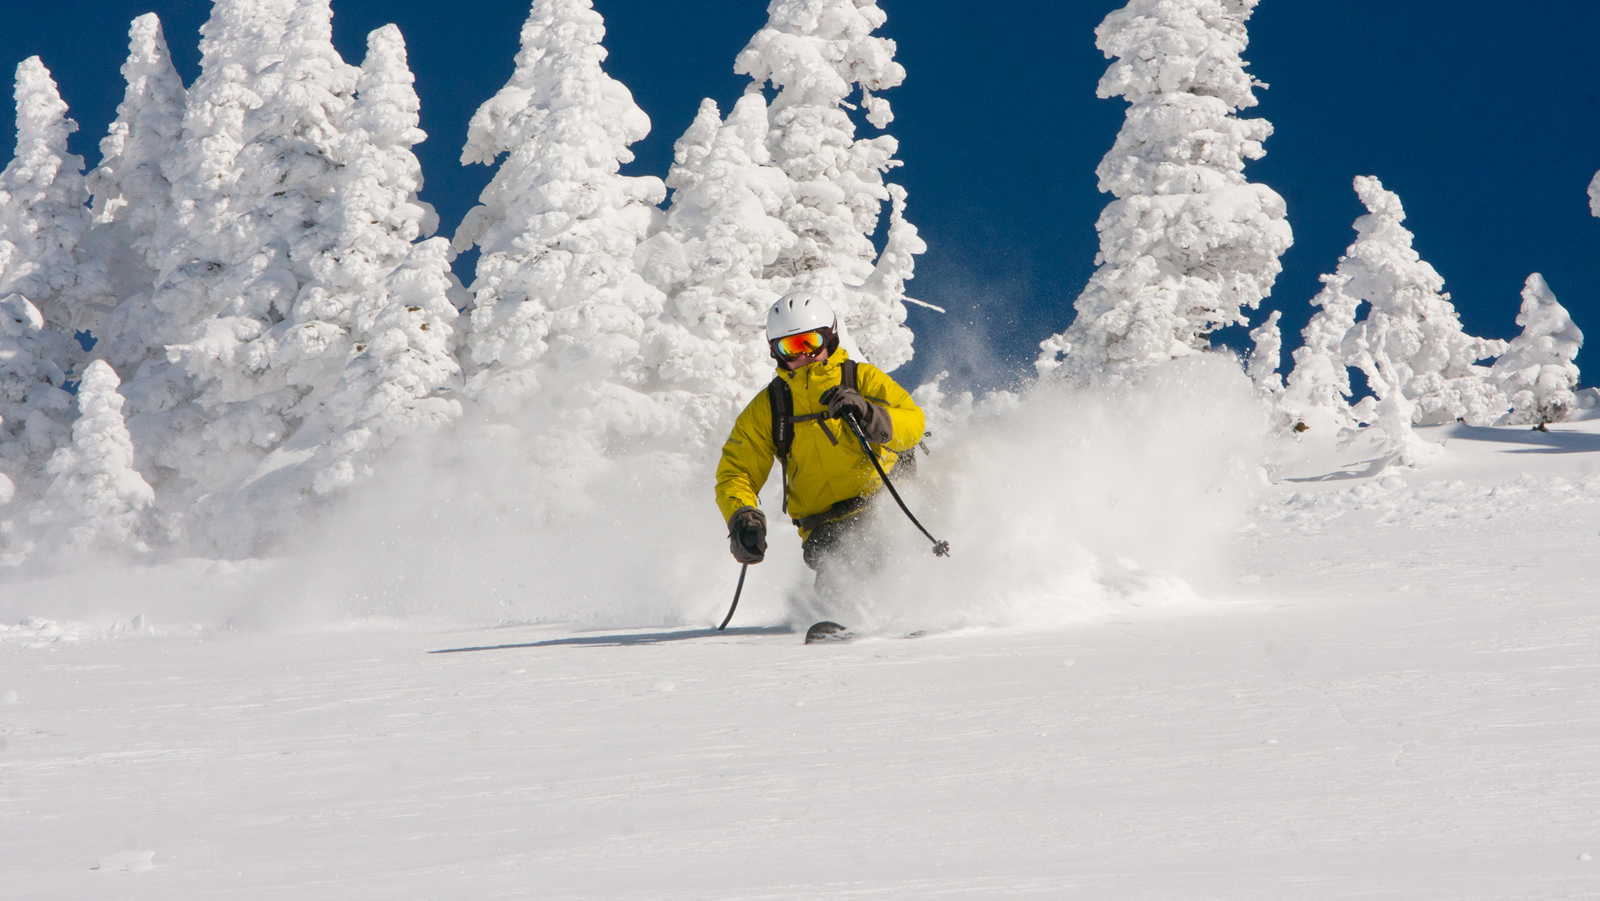 Powder Skiing Wallpaper Image Pictures Becuo